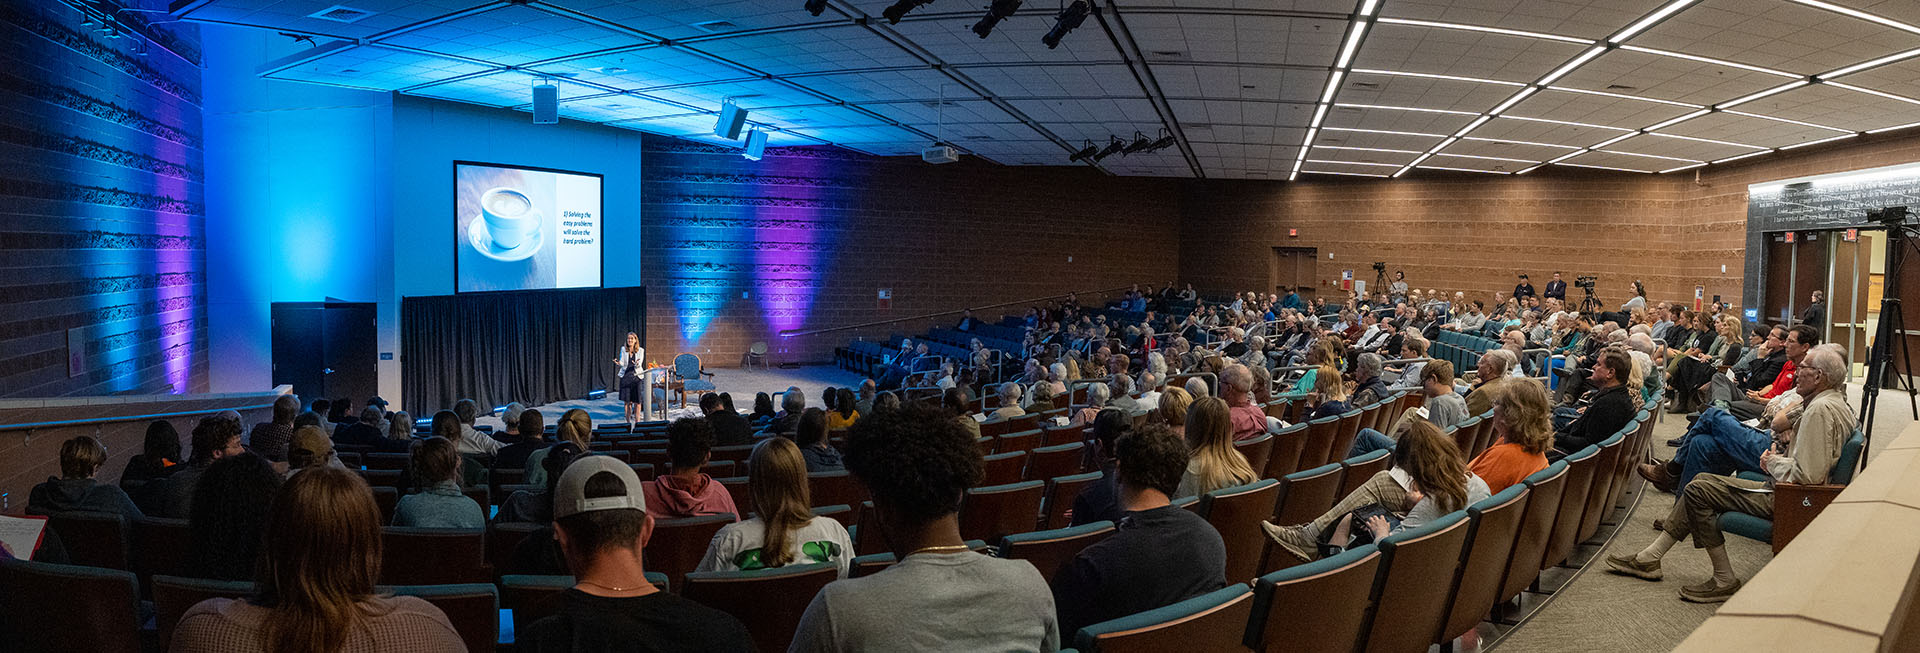 wide shot of the lanier lecture from the back